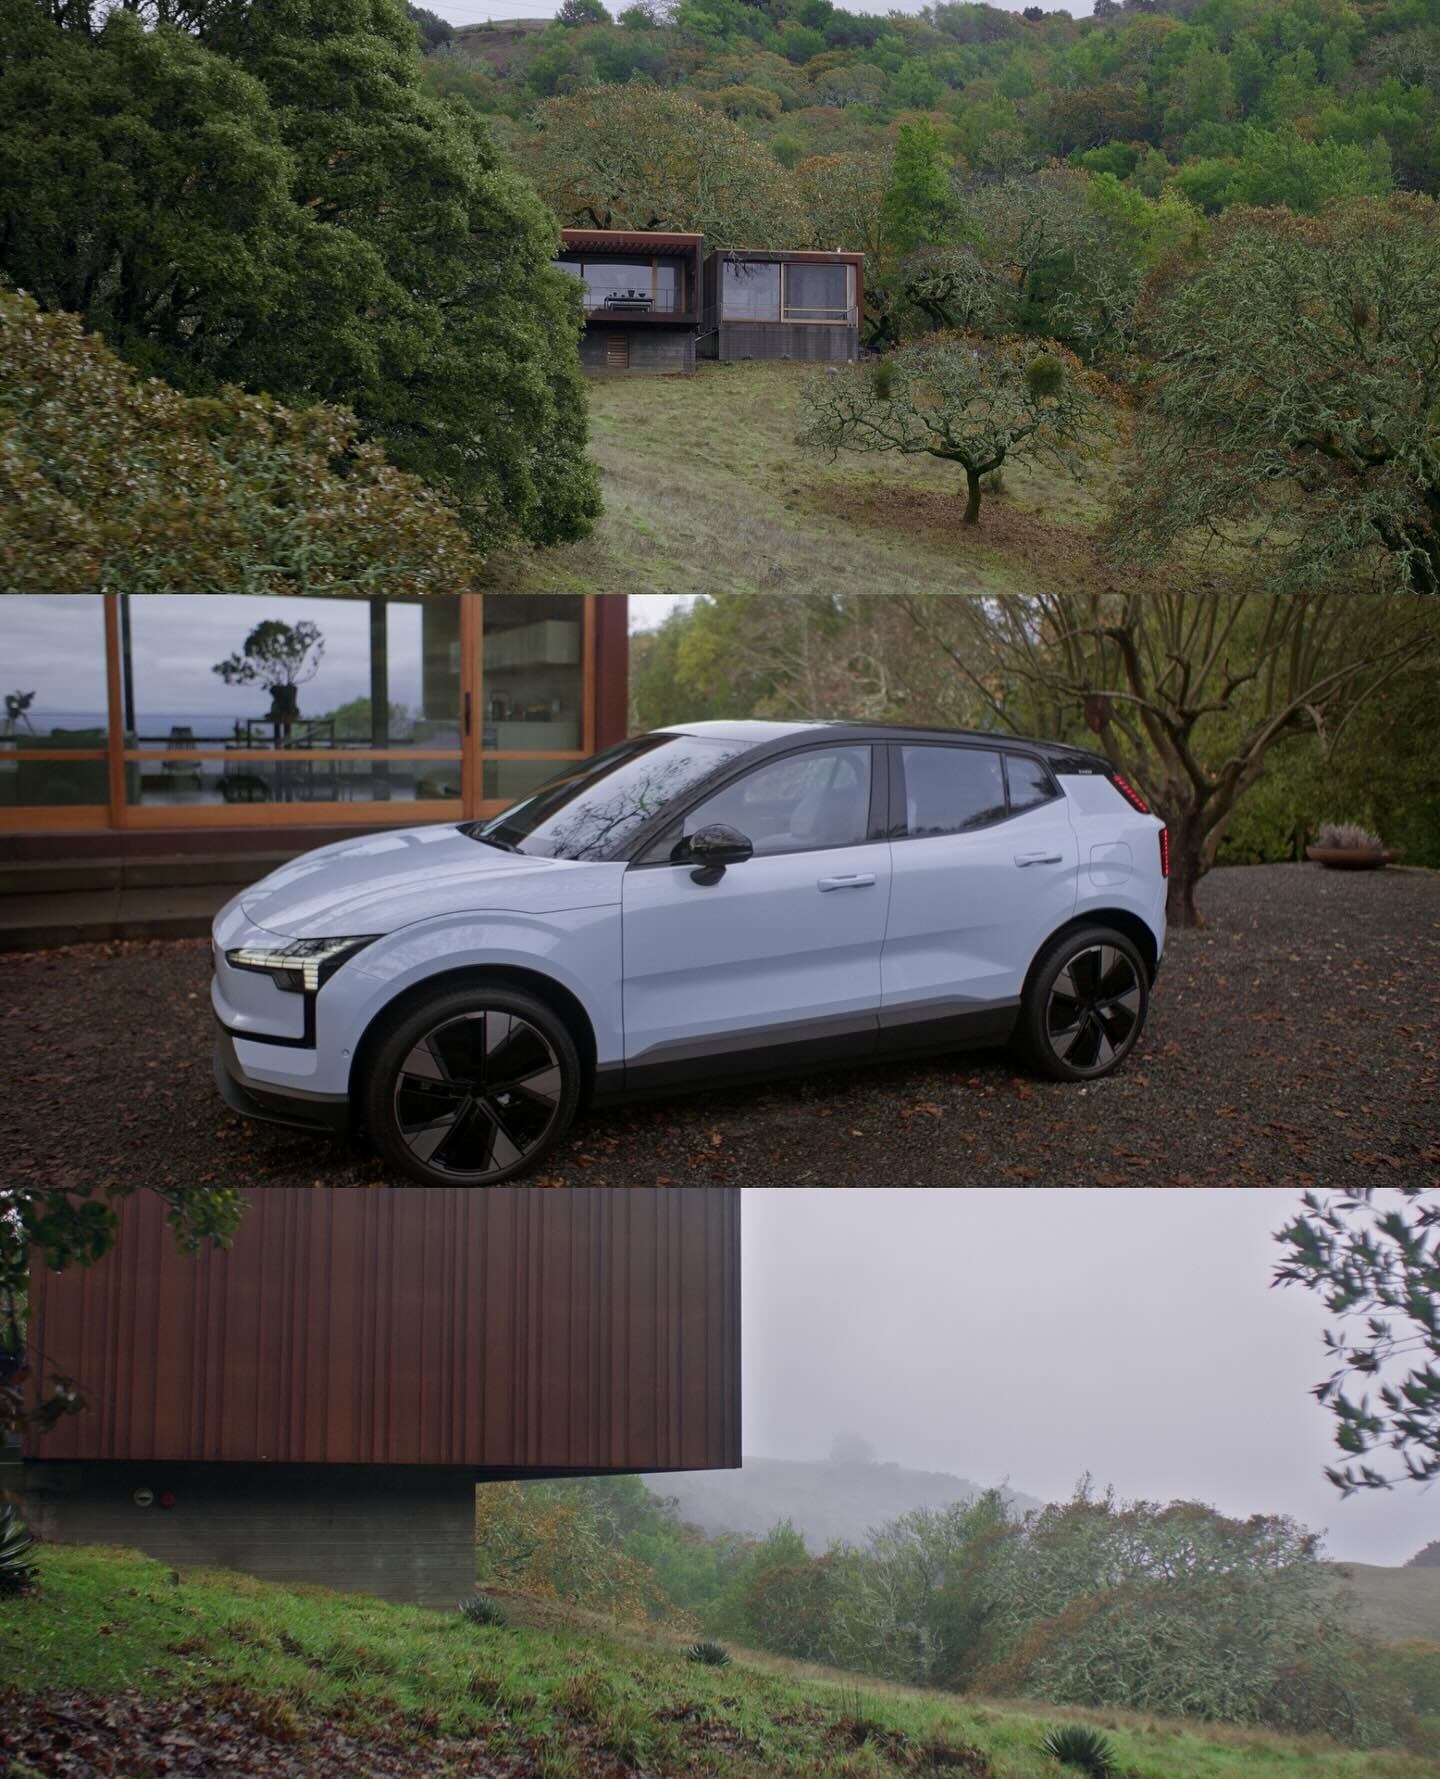 &ldquo;Big Design, Small Living&rdquo; for @volvocars &amp; @archdigest

Talent - @davidlatimer_
Creative Director, Conde Nast - @danakraves
Director - @shernnotsean
DP - @jordanraykelly
Production Company - @brother.films
Executive Producer, Conde N